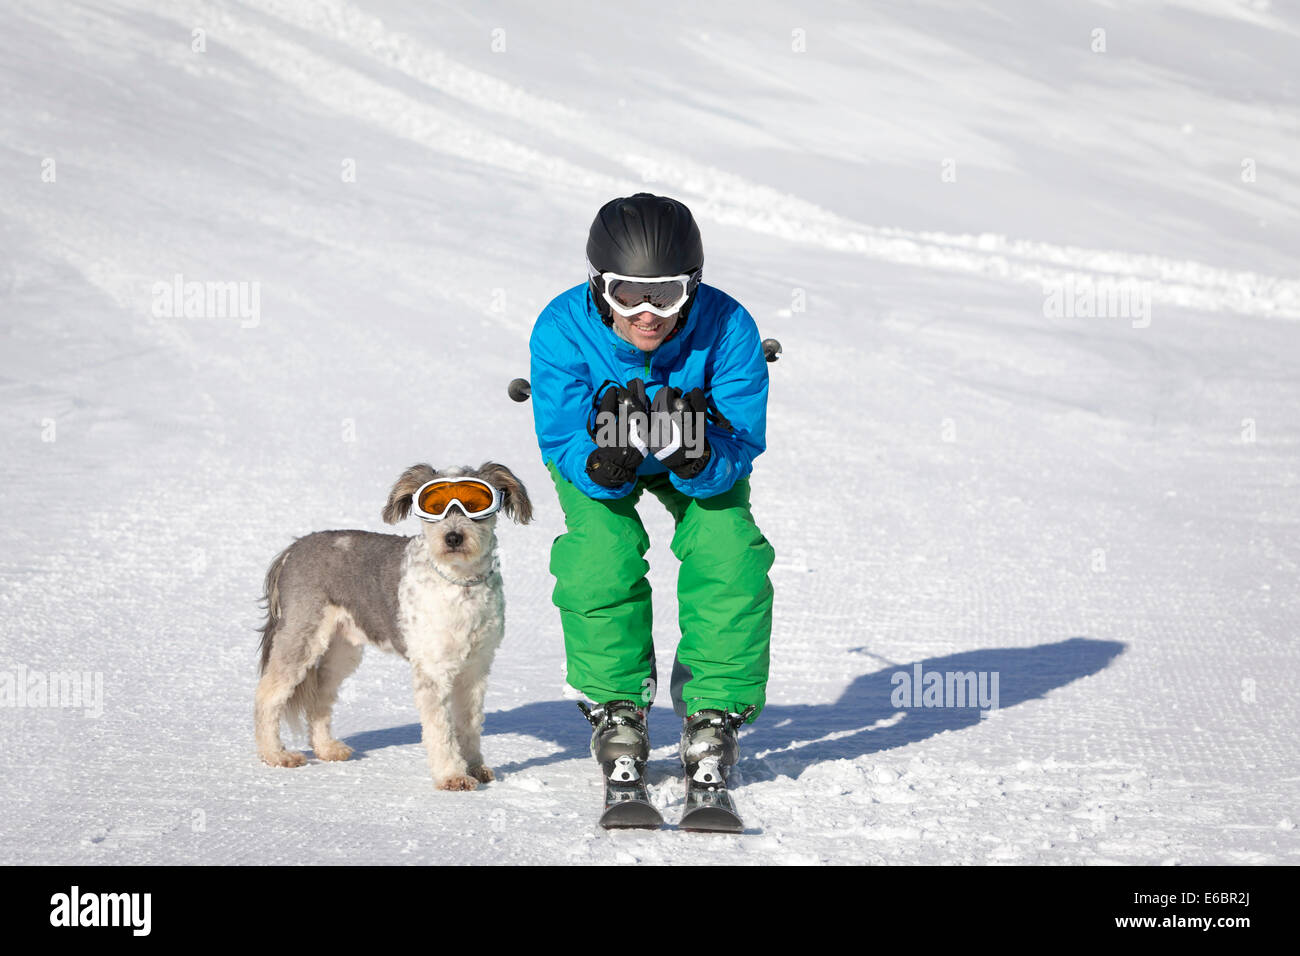 A skier and his dog with snow goggles on a ski slope, Carosello 3000, Livigno, Lombardy, Italy Stock Photo